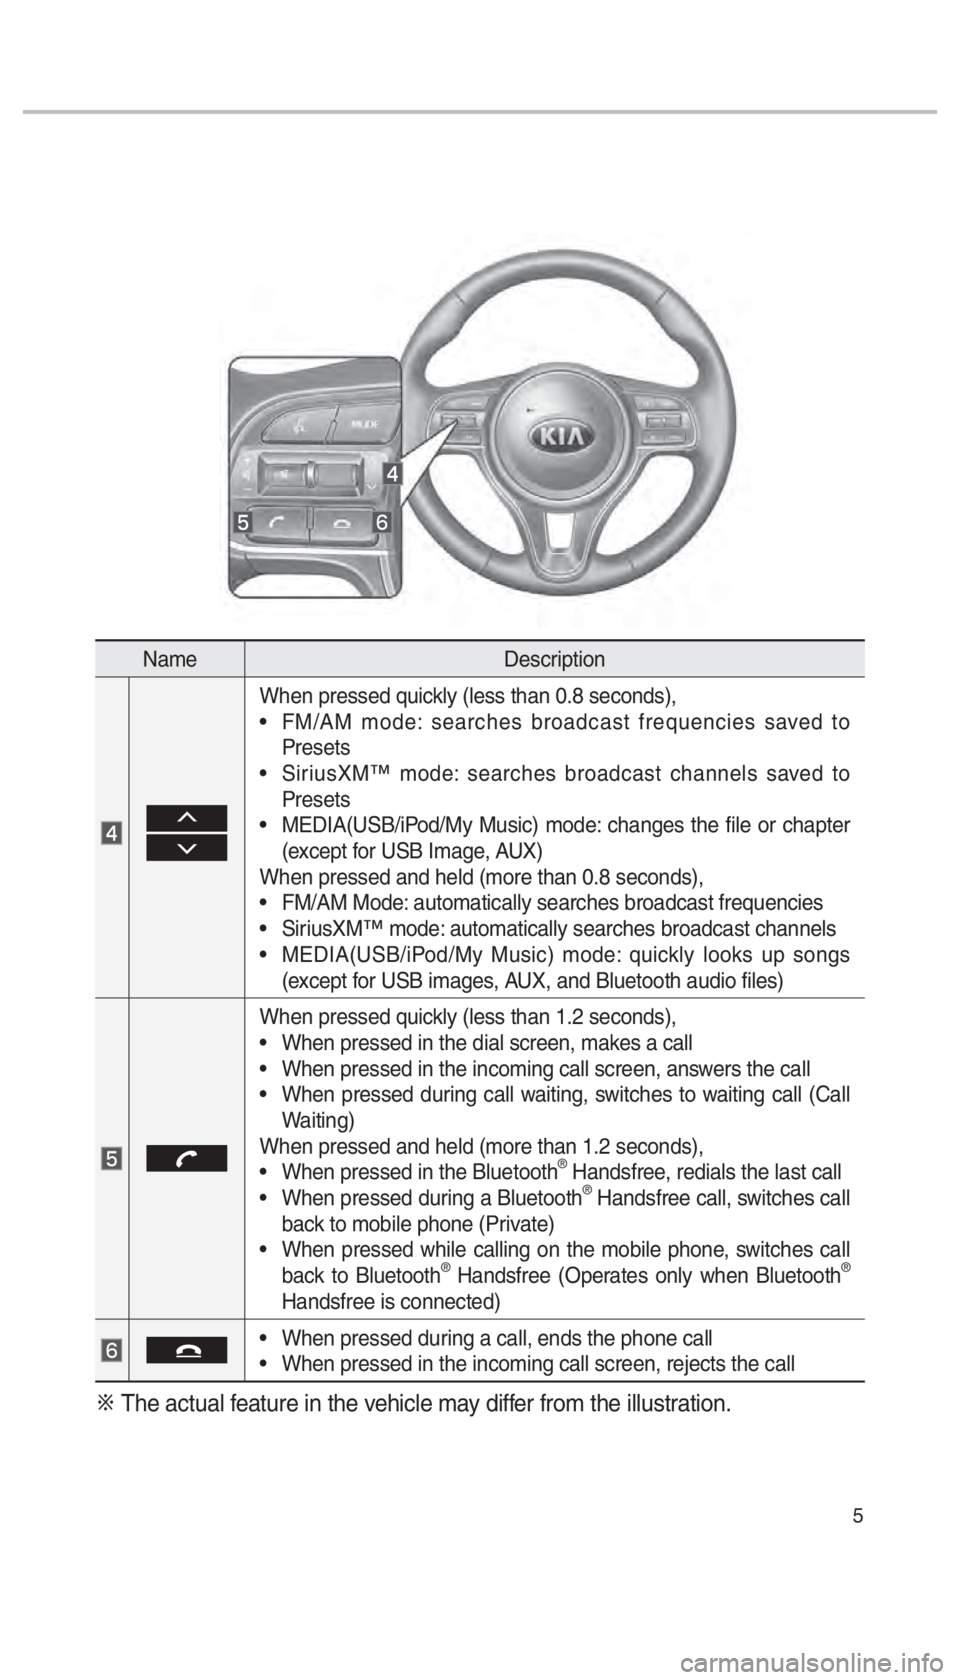 KIA SEDONA 2018  Navigation System Quick Reference Guide 5
NameDescription
 0003
0003
When pressed quickly (less than 0.8 seconds),
•  FM/AM mode: searches broadcast frequencies saved to 
Presets
•  SiriusXM™ mode: searches broadcast channels saved to